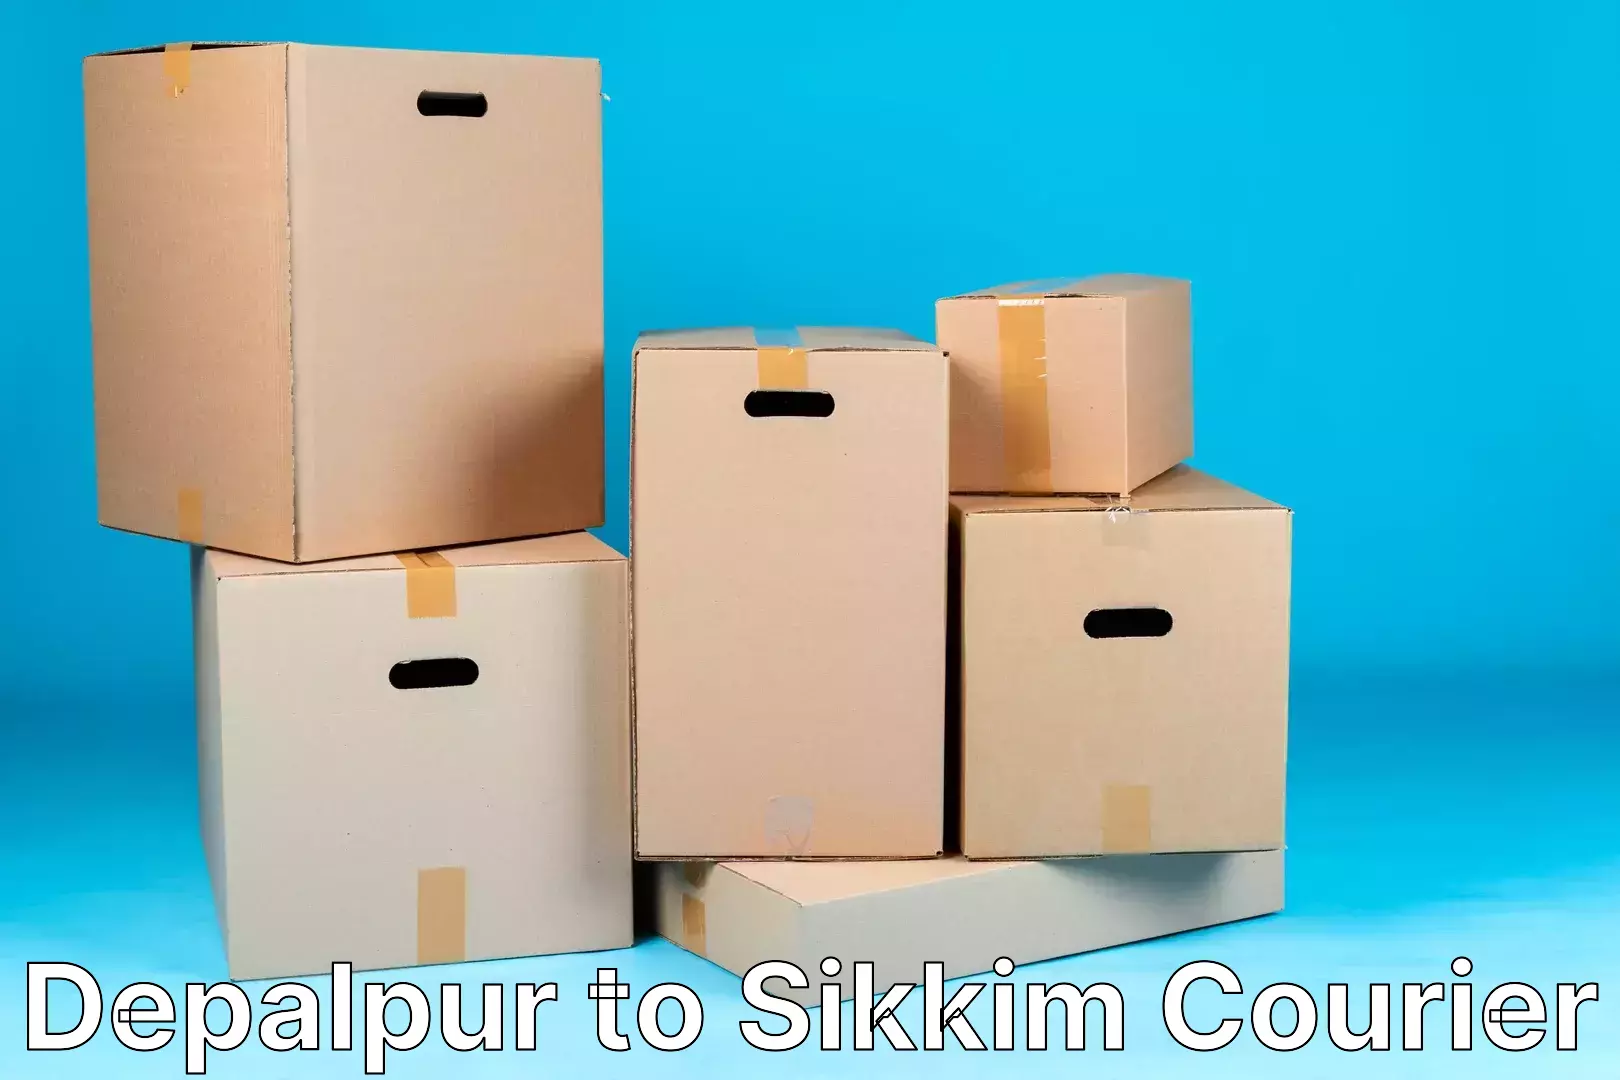 Advanced shipping network Depalpur to Sikkim